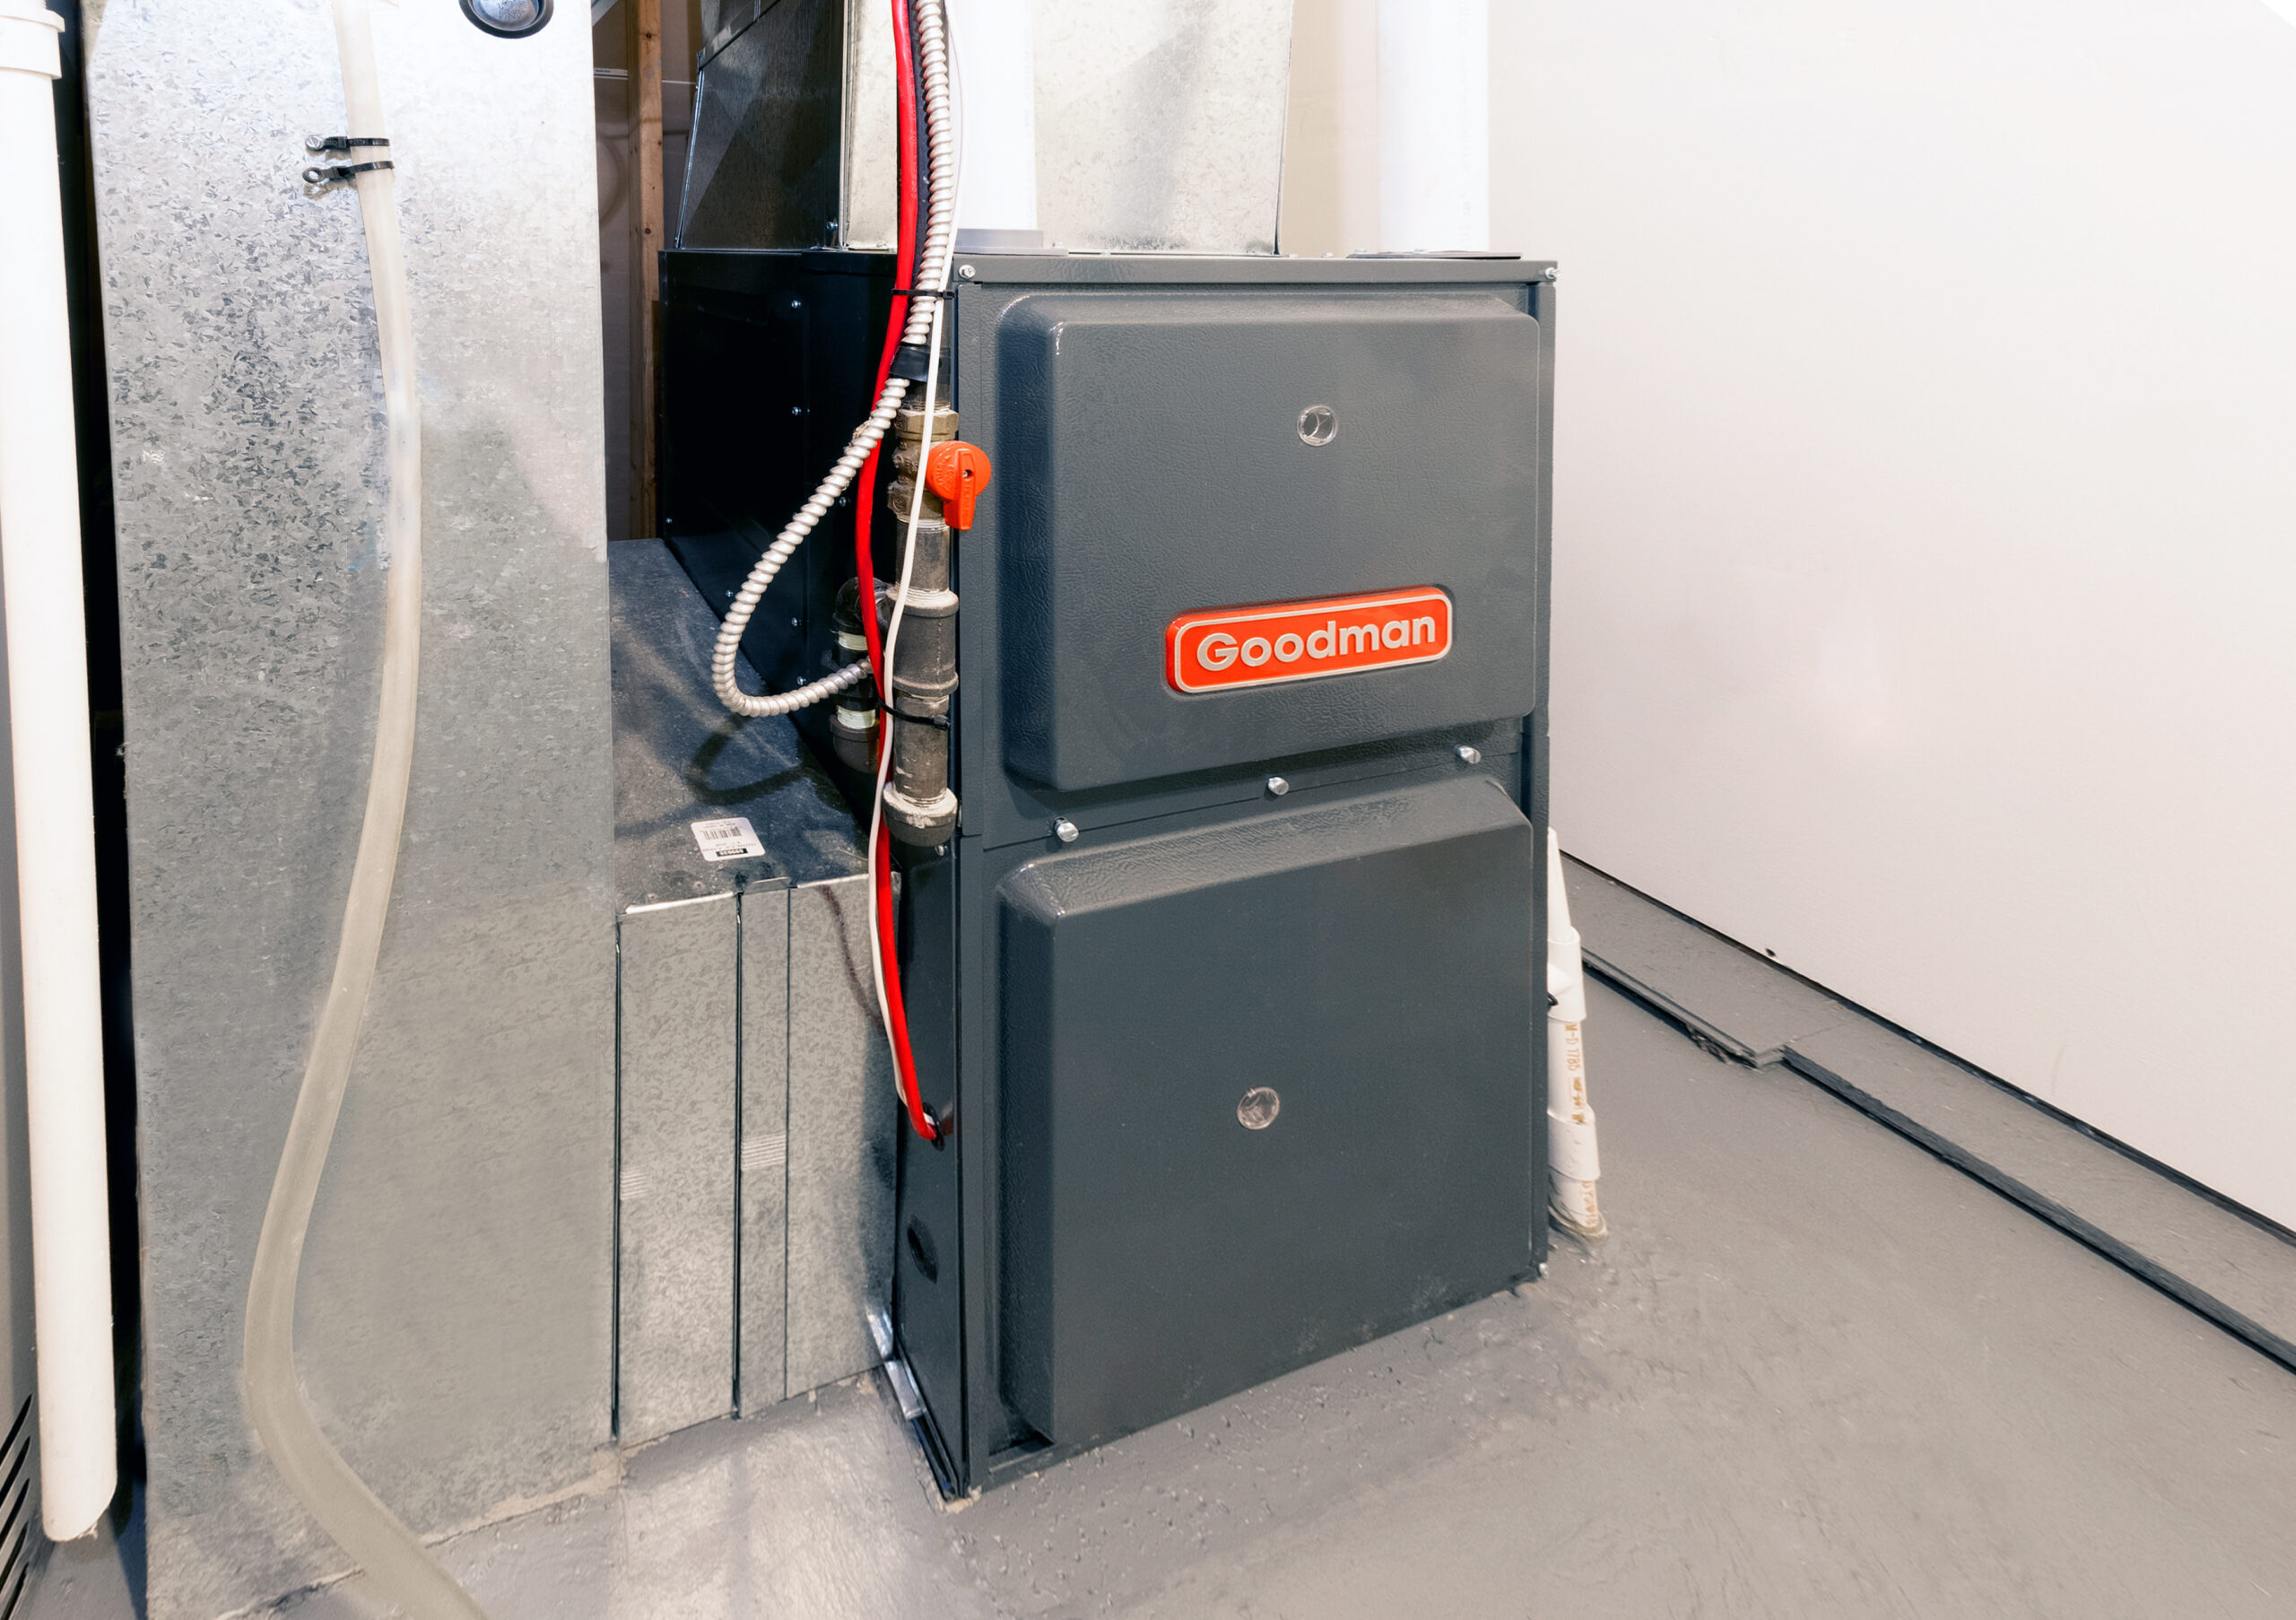 What to Look for When Considering a Used Furnace